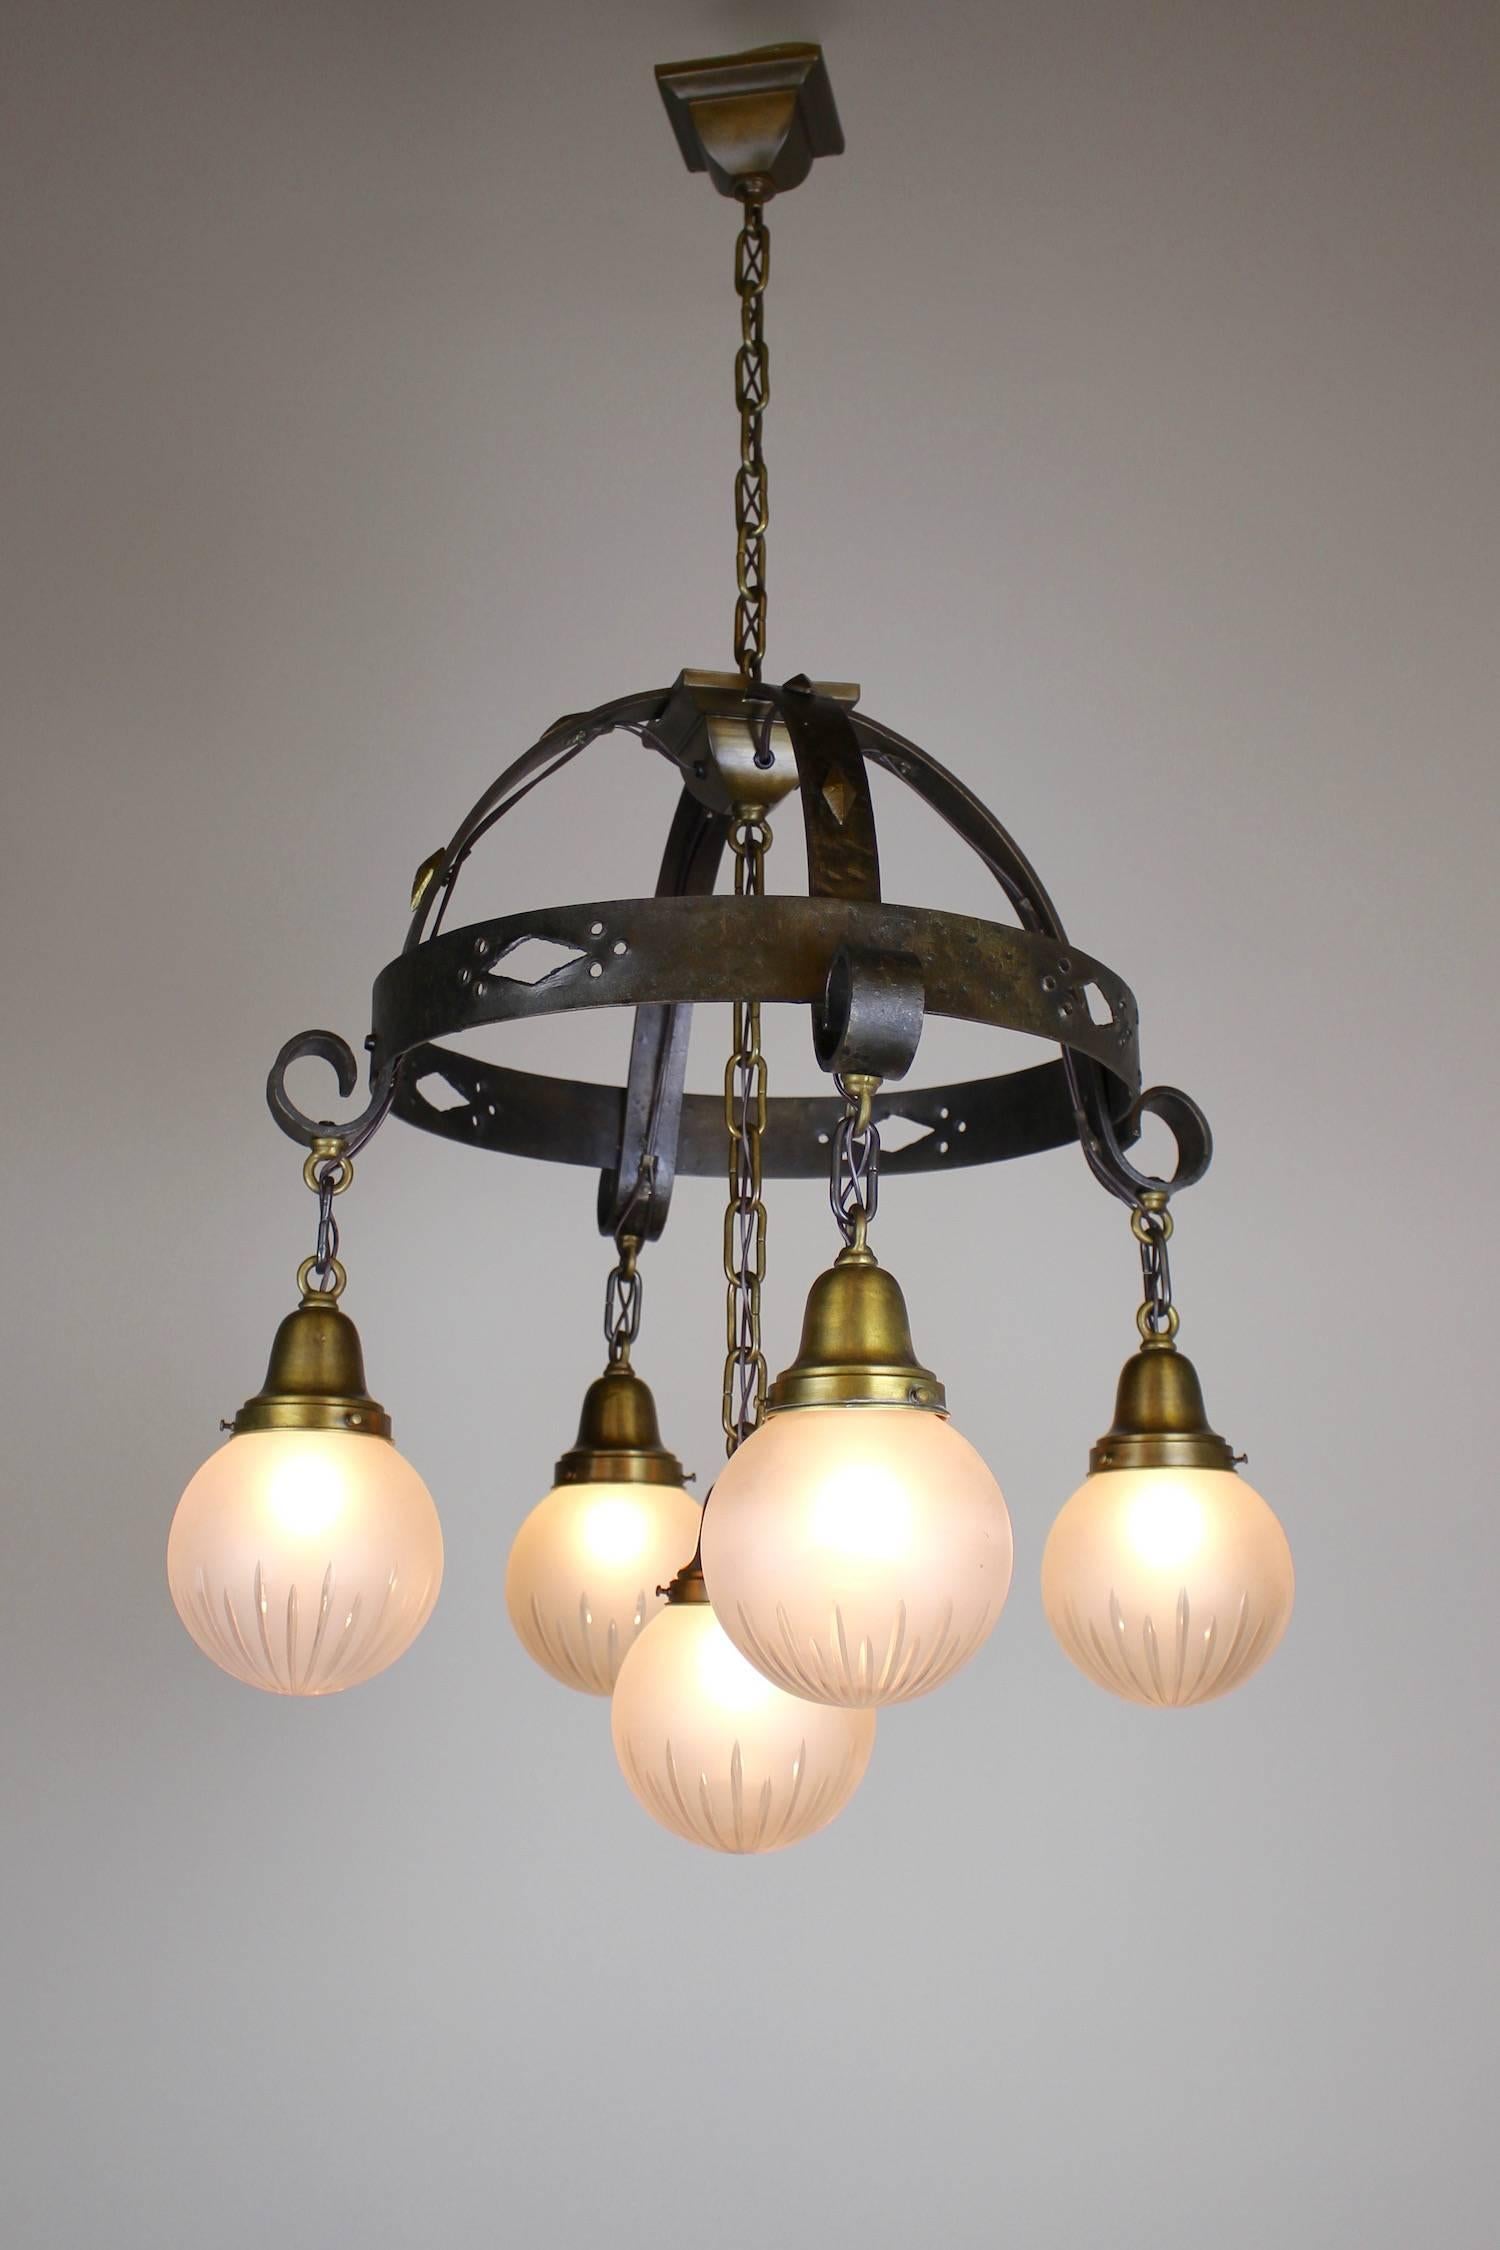 This is a wonderful example of handcrafted arts and crafts lighting by Beardslee of Chicago, circa 1920. This five-light ring fixture is hammered iron with punched cut-out and diamond stud detail. Fitted with wheel cut ball shades this is a